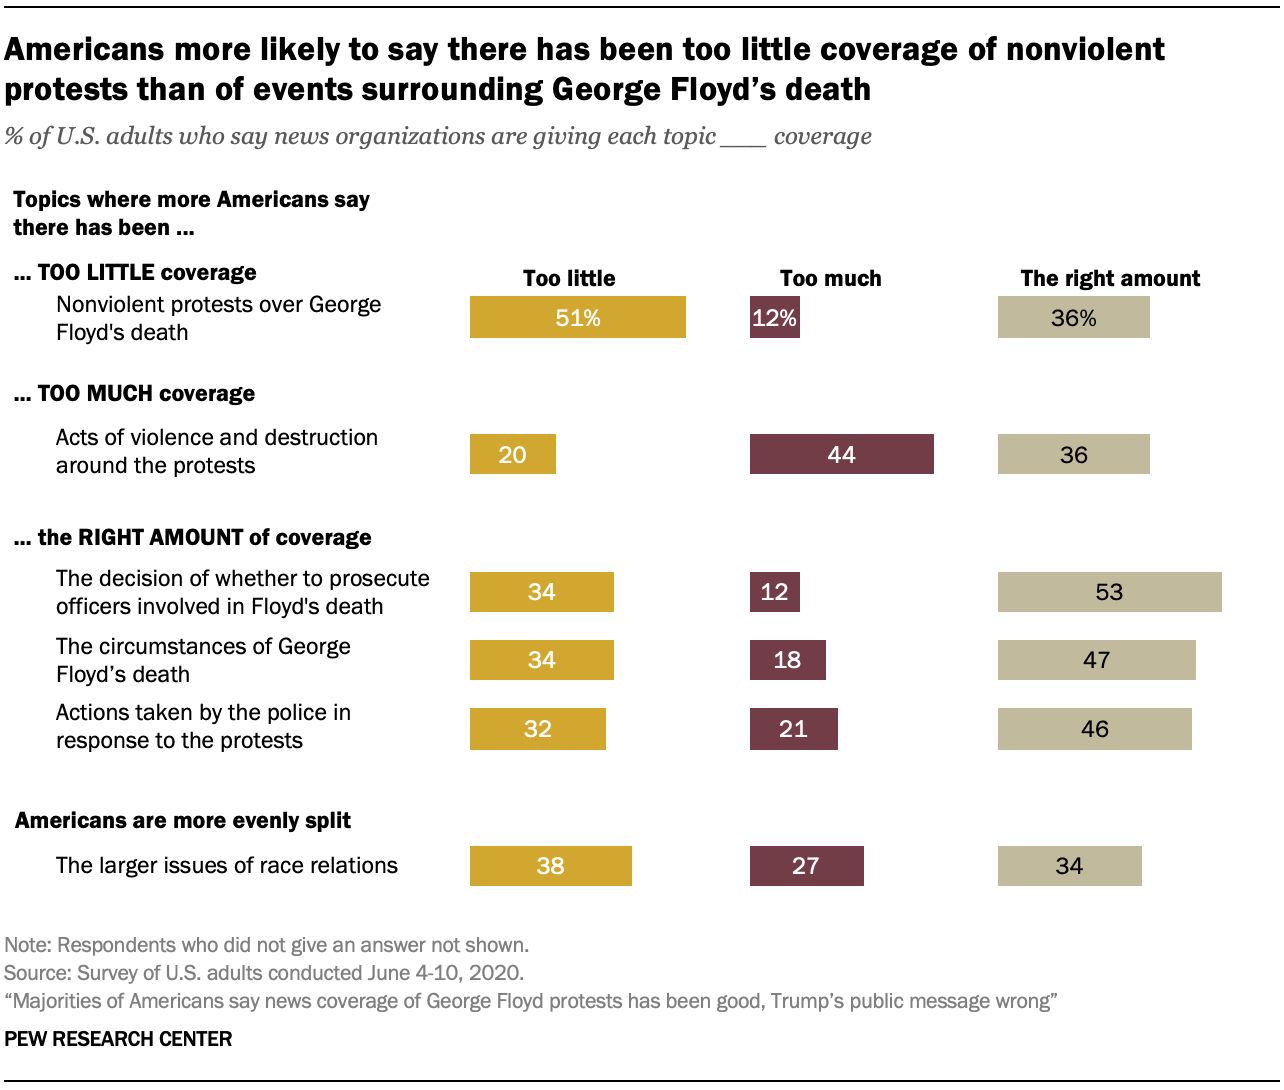 Americans more likely to say there has been too little coverage of nonviolent protests than of events surrounding George Floyd’s death